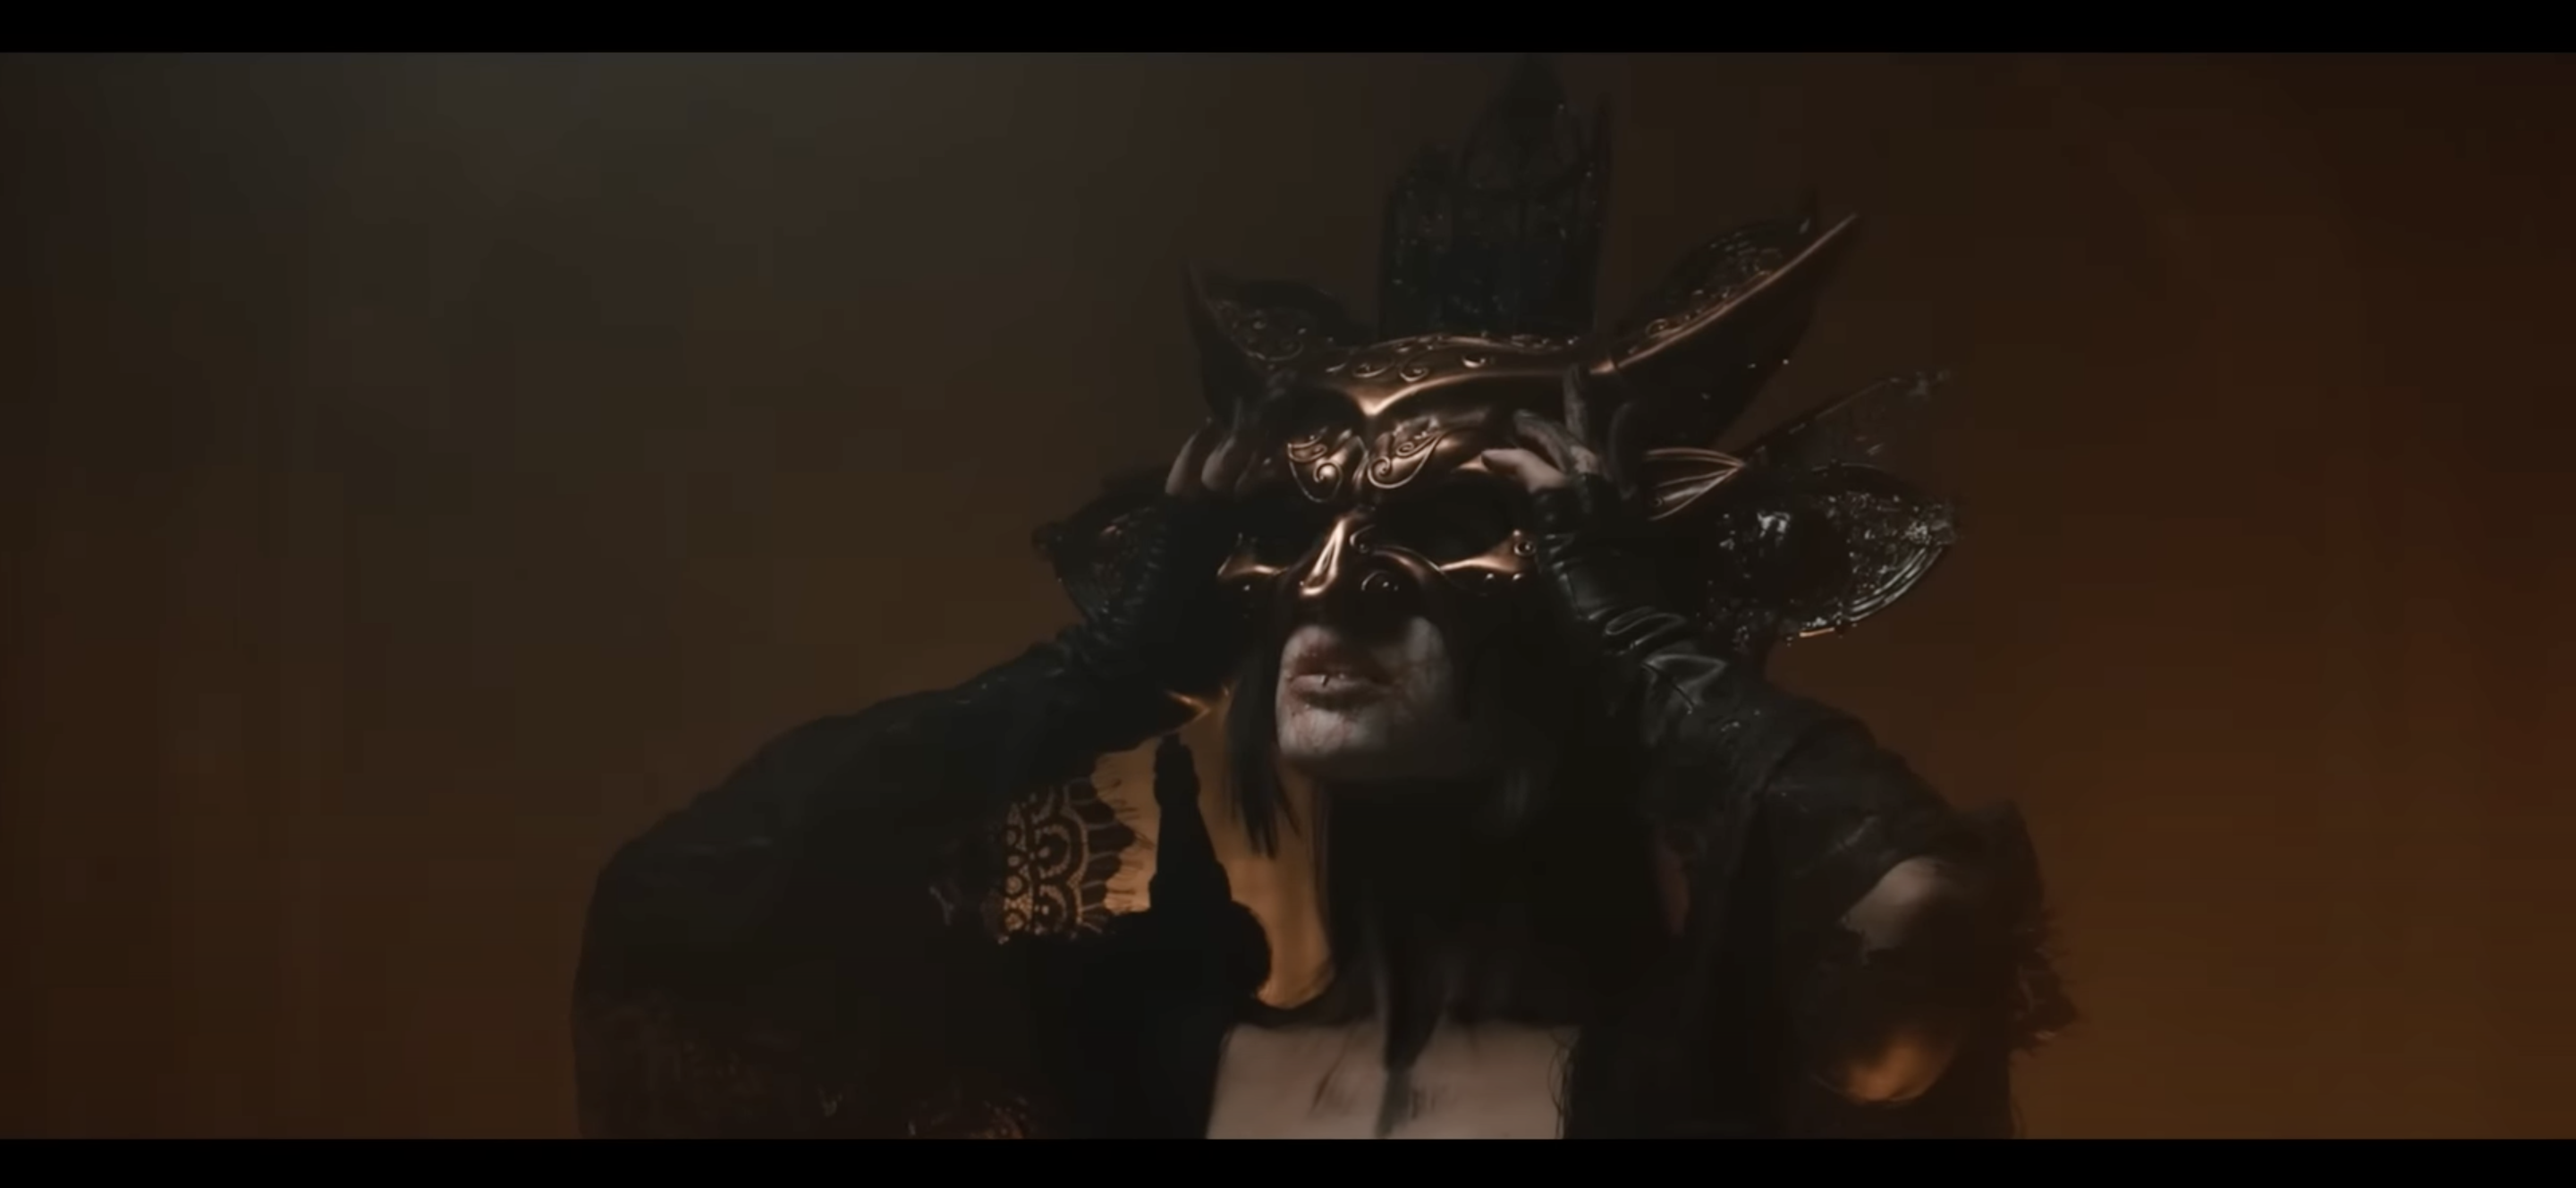 WATCH | “She is a Fire” by Cradle of Filth